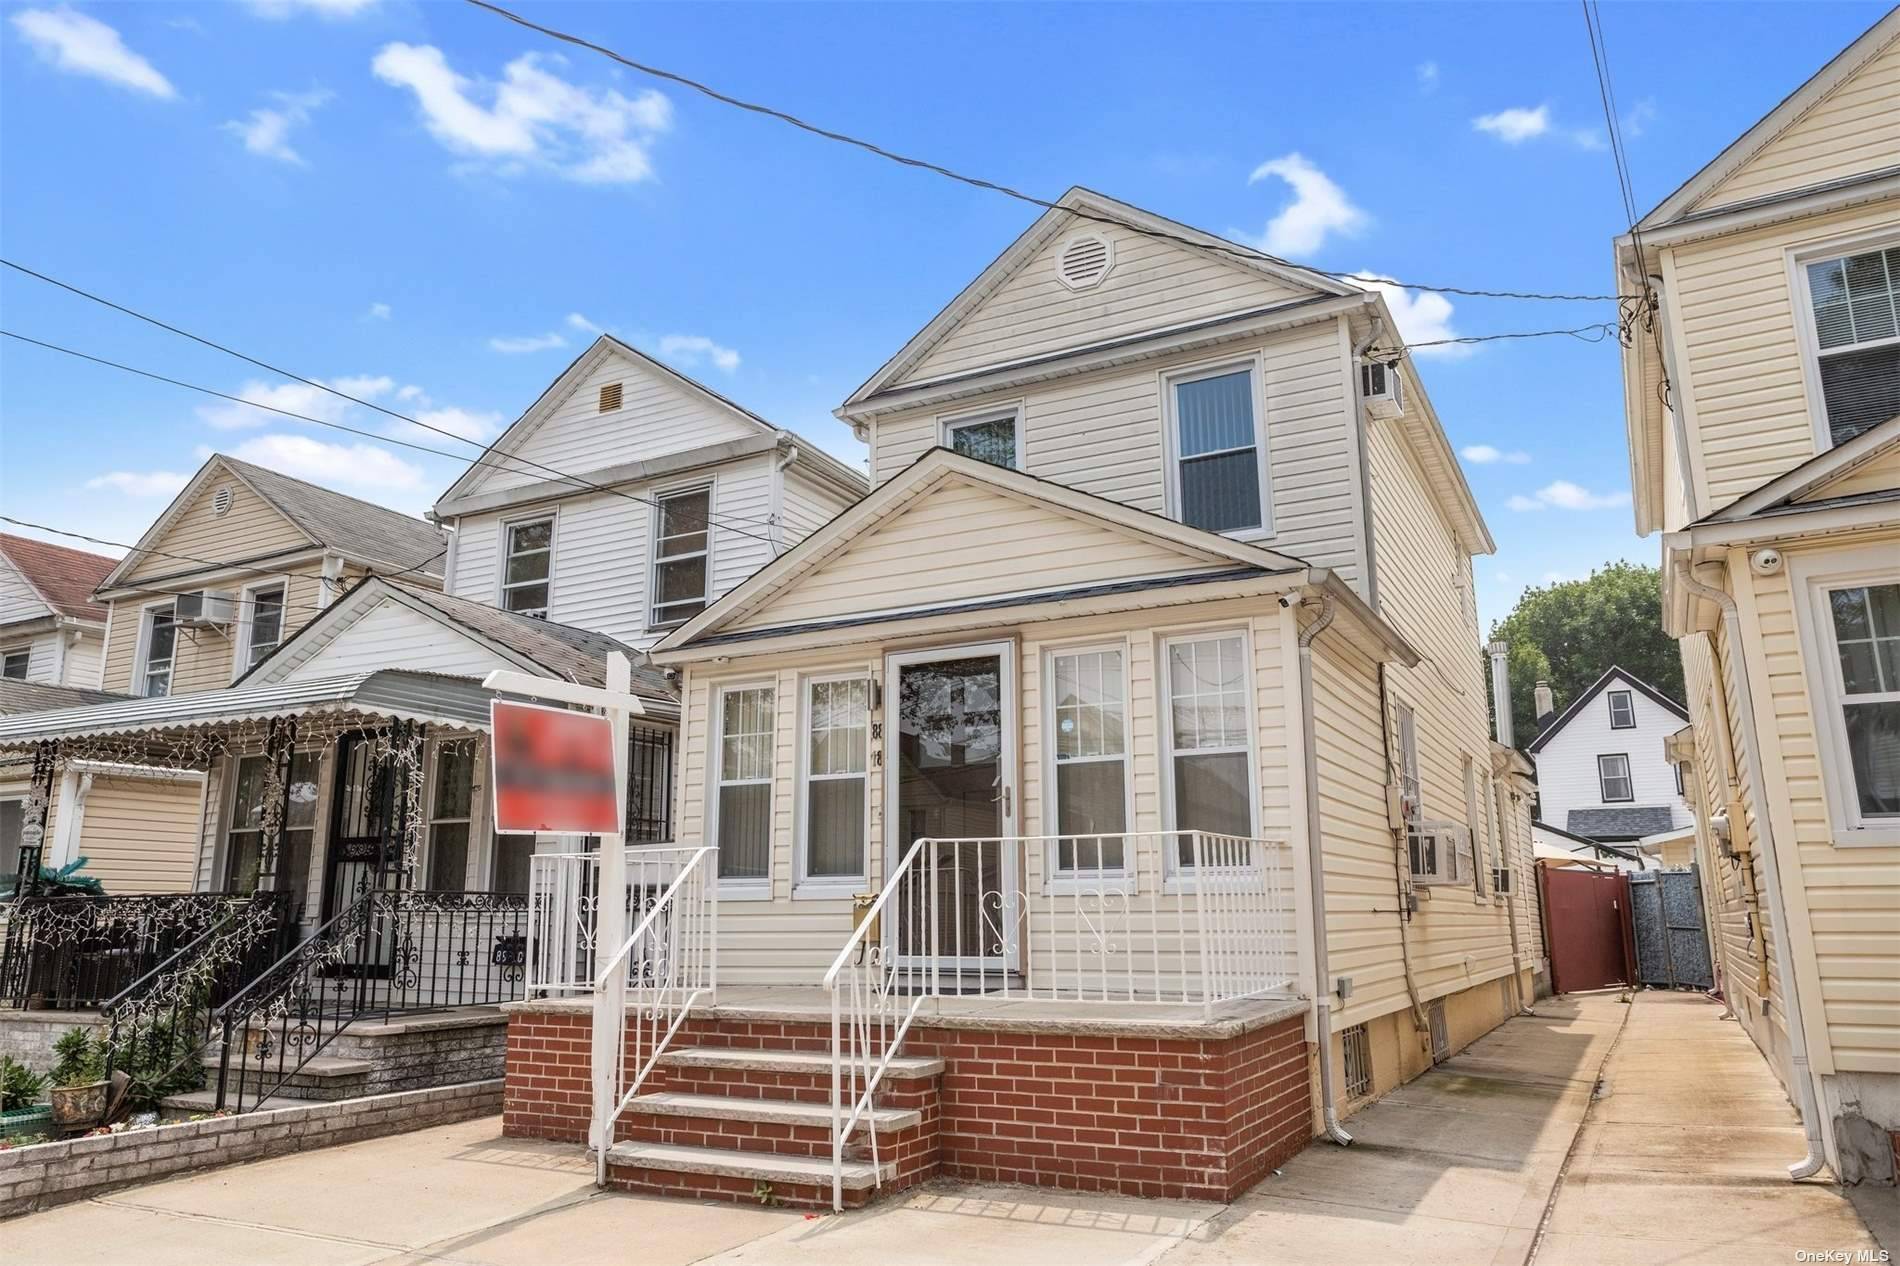 Welcome to this stunning single family home nestled in the heart of Hollis, Queens.